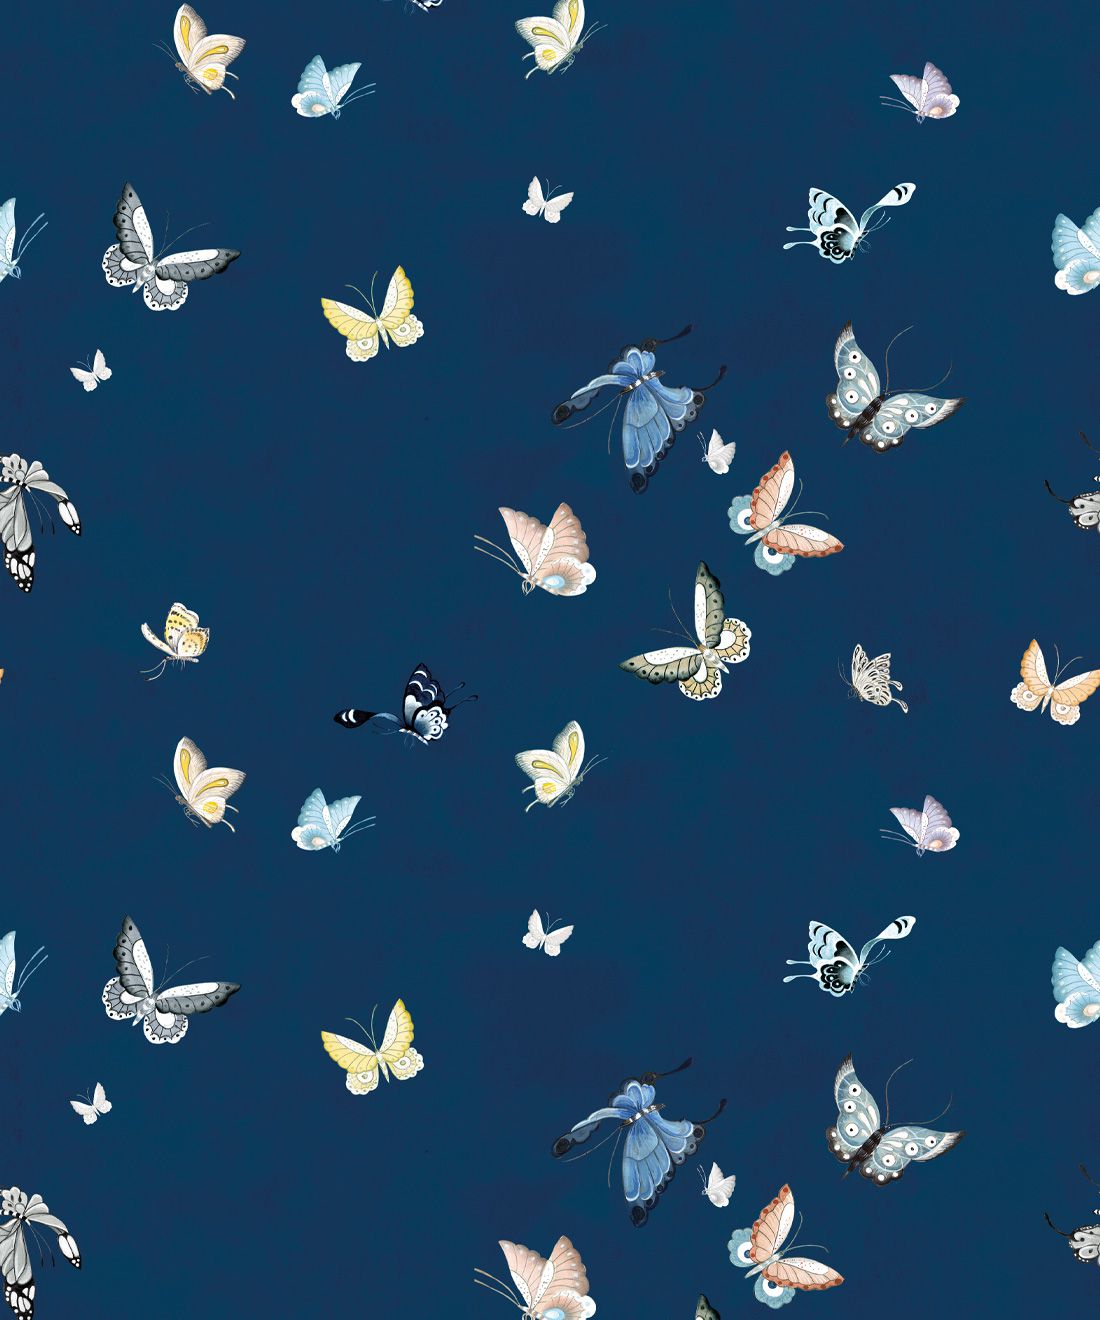 A pattern of colorful butterflies on a navy blue background - Butterfly